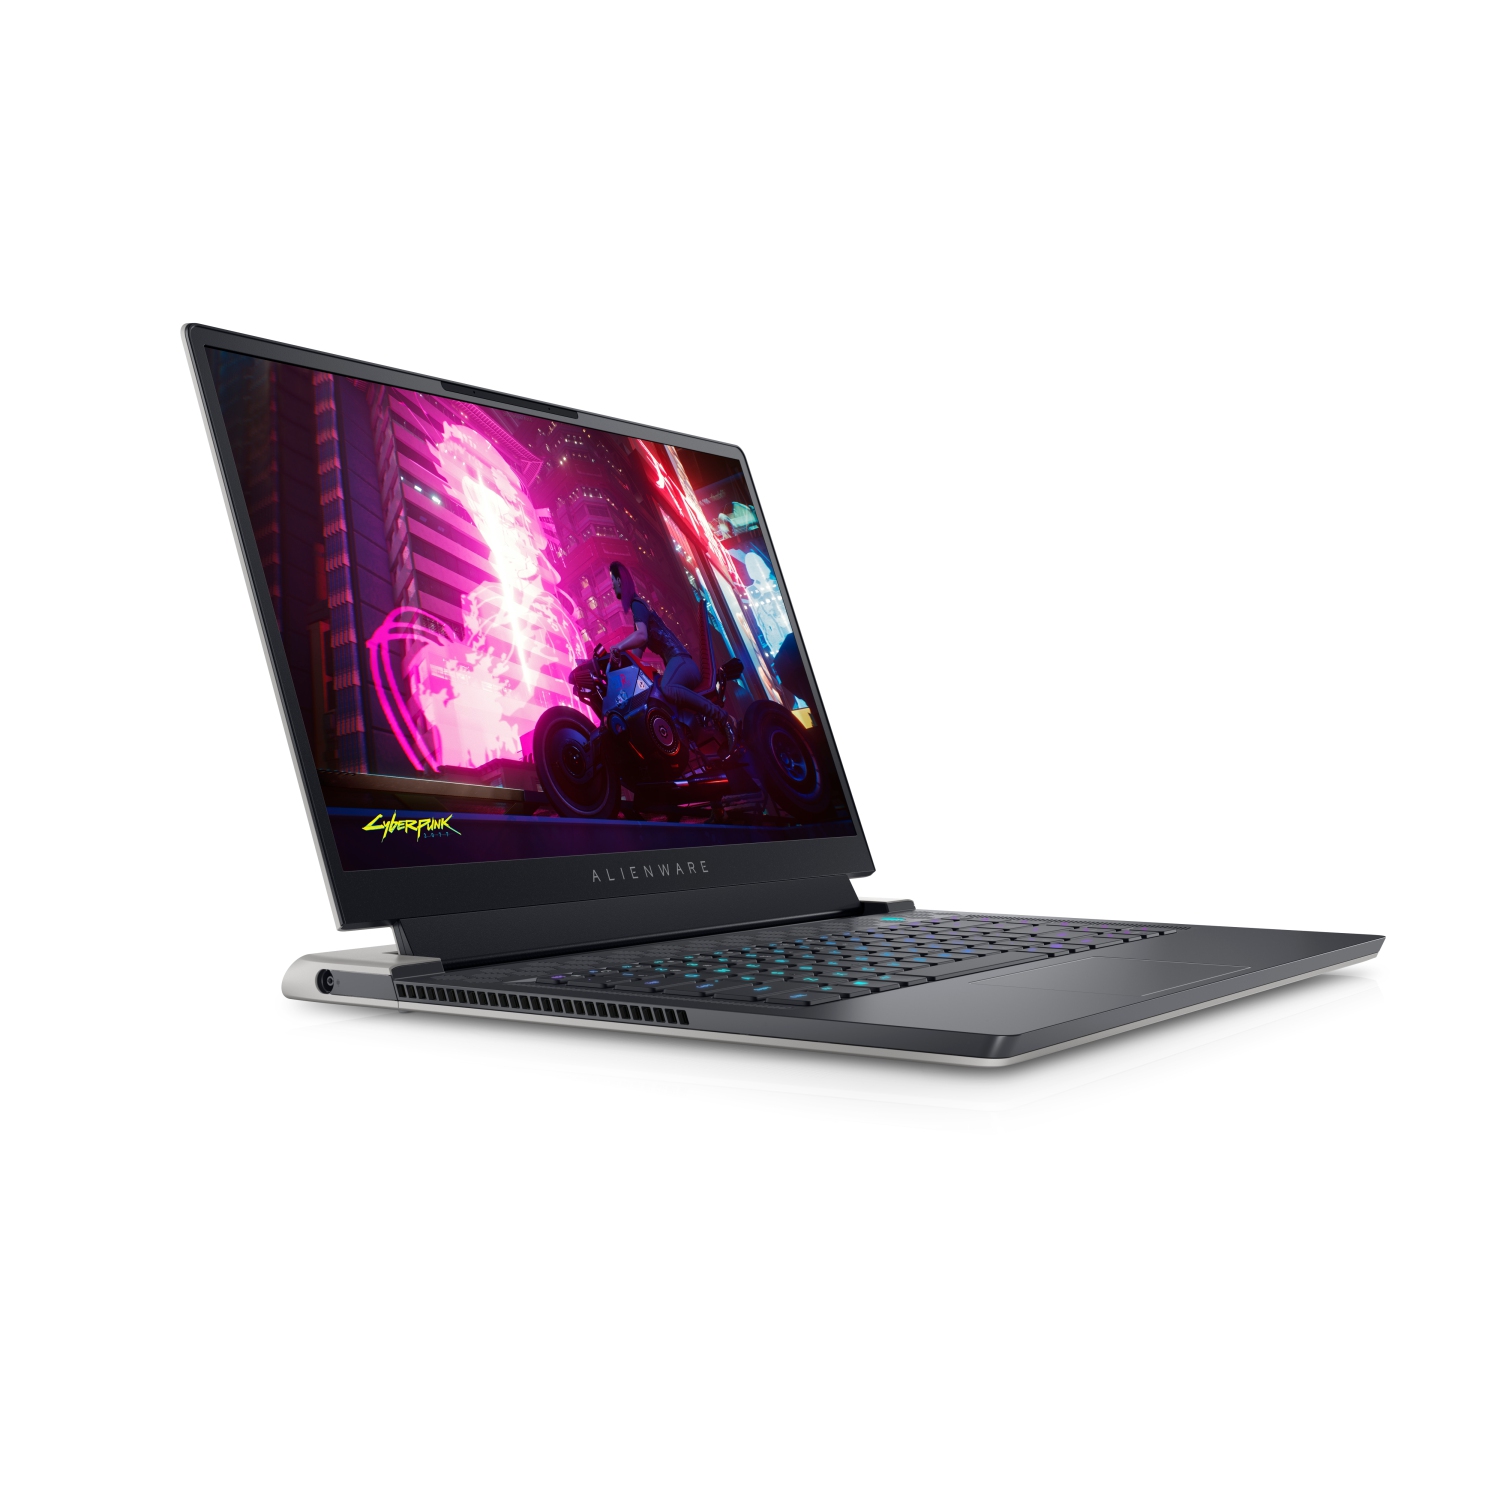 Refurbished (Excellent) – Dell Alienware X15 R1 Gaming Laptop (2021) | 15.6" FHD | Core i7 - 1TB SSD - 32GB RAM - RTX 3070 | 8 Cores @ 4.6 GHz - 11th Gen CPU - 8GB GDDR6